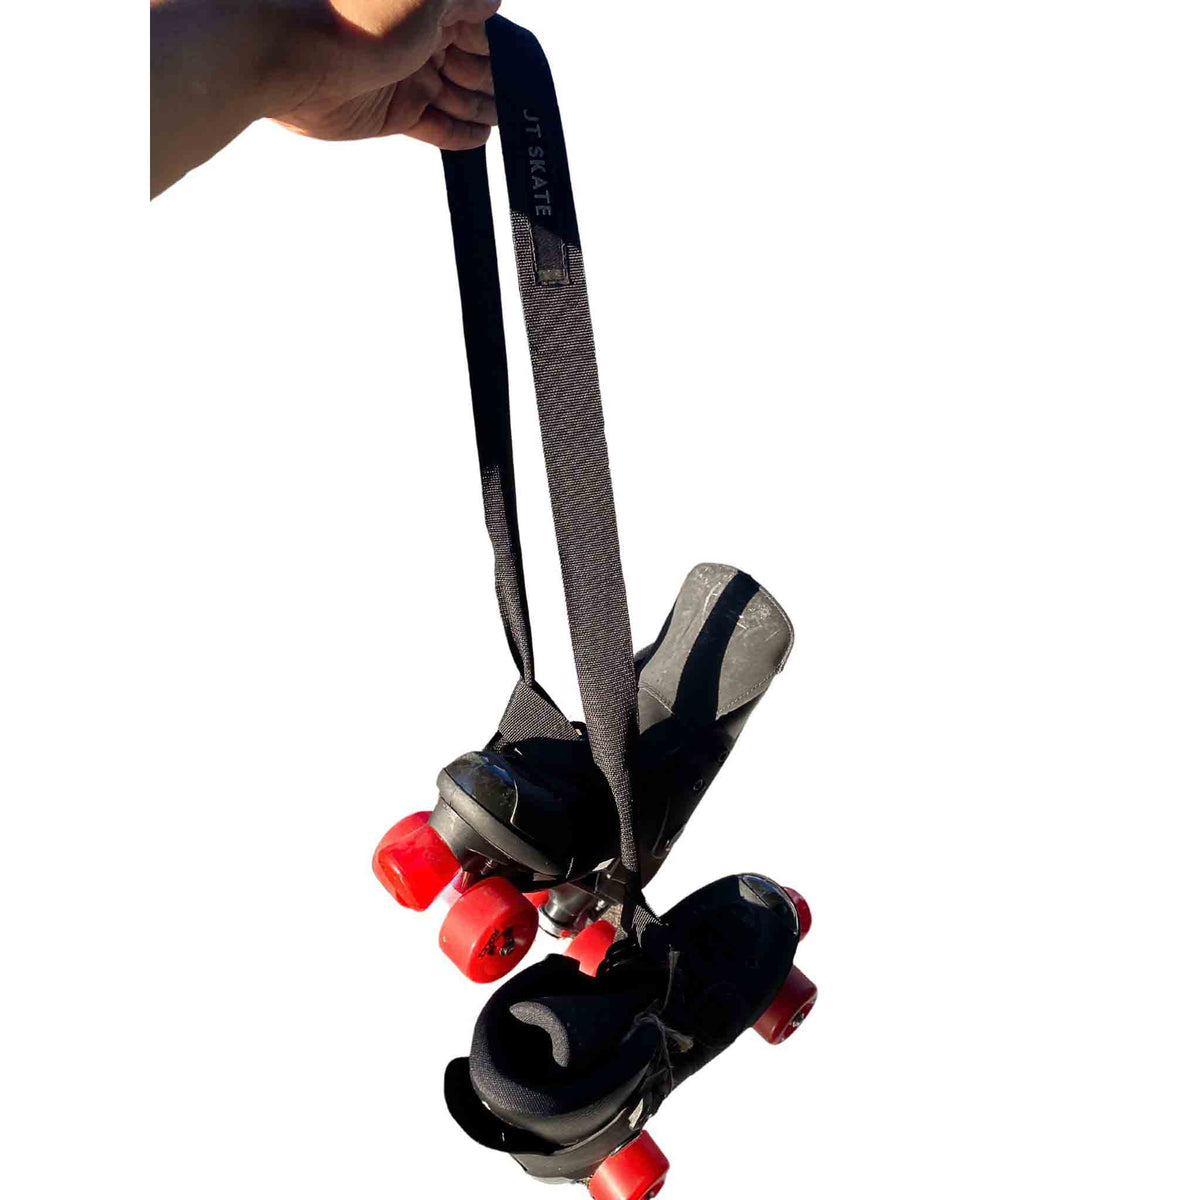 Roller Skate Leash | Carry Strap | Fashionable - Roller Skates Parts and Accessories | JT Skate